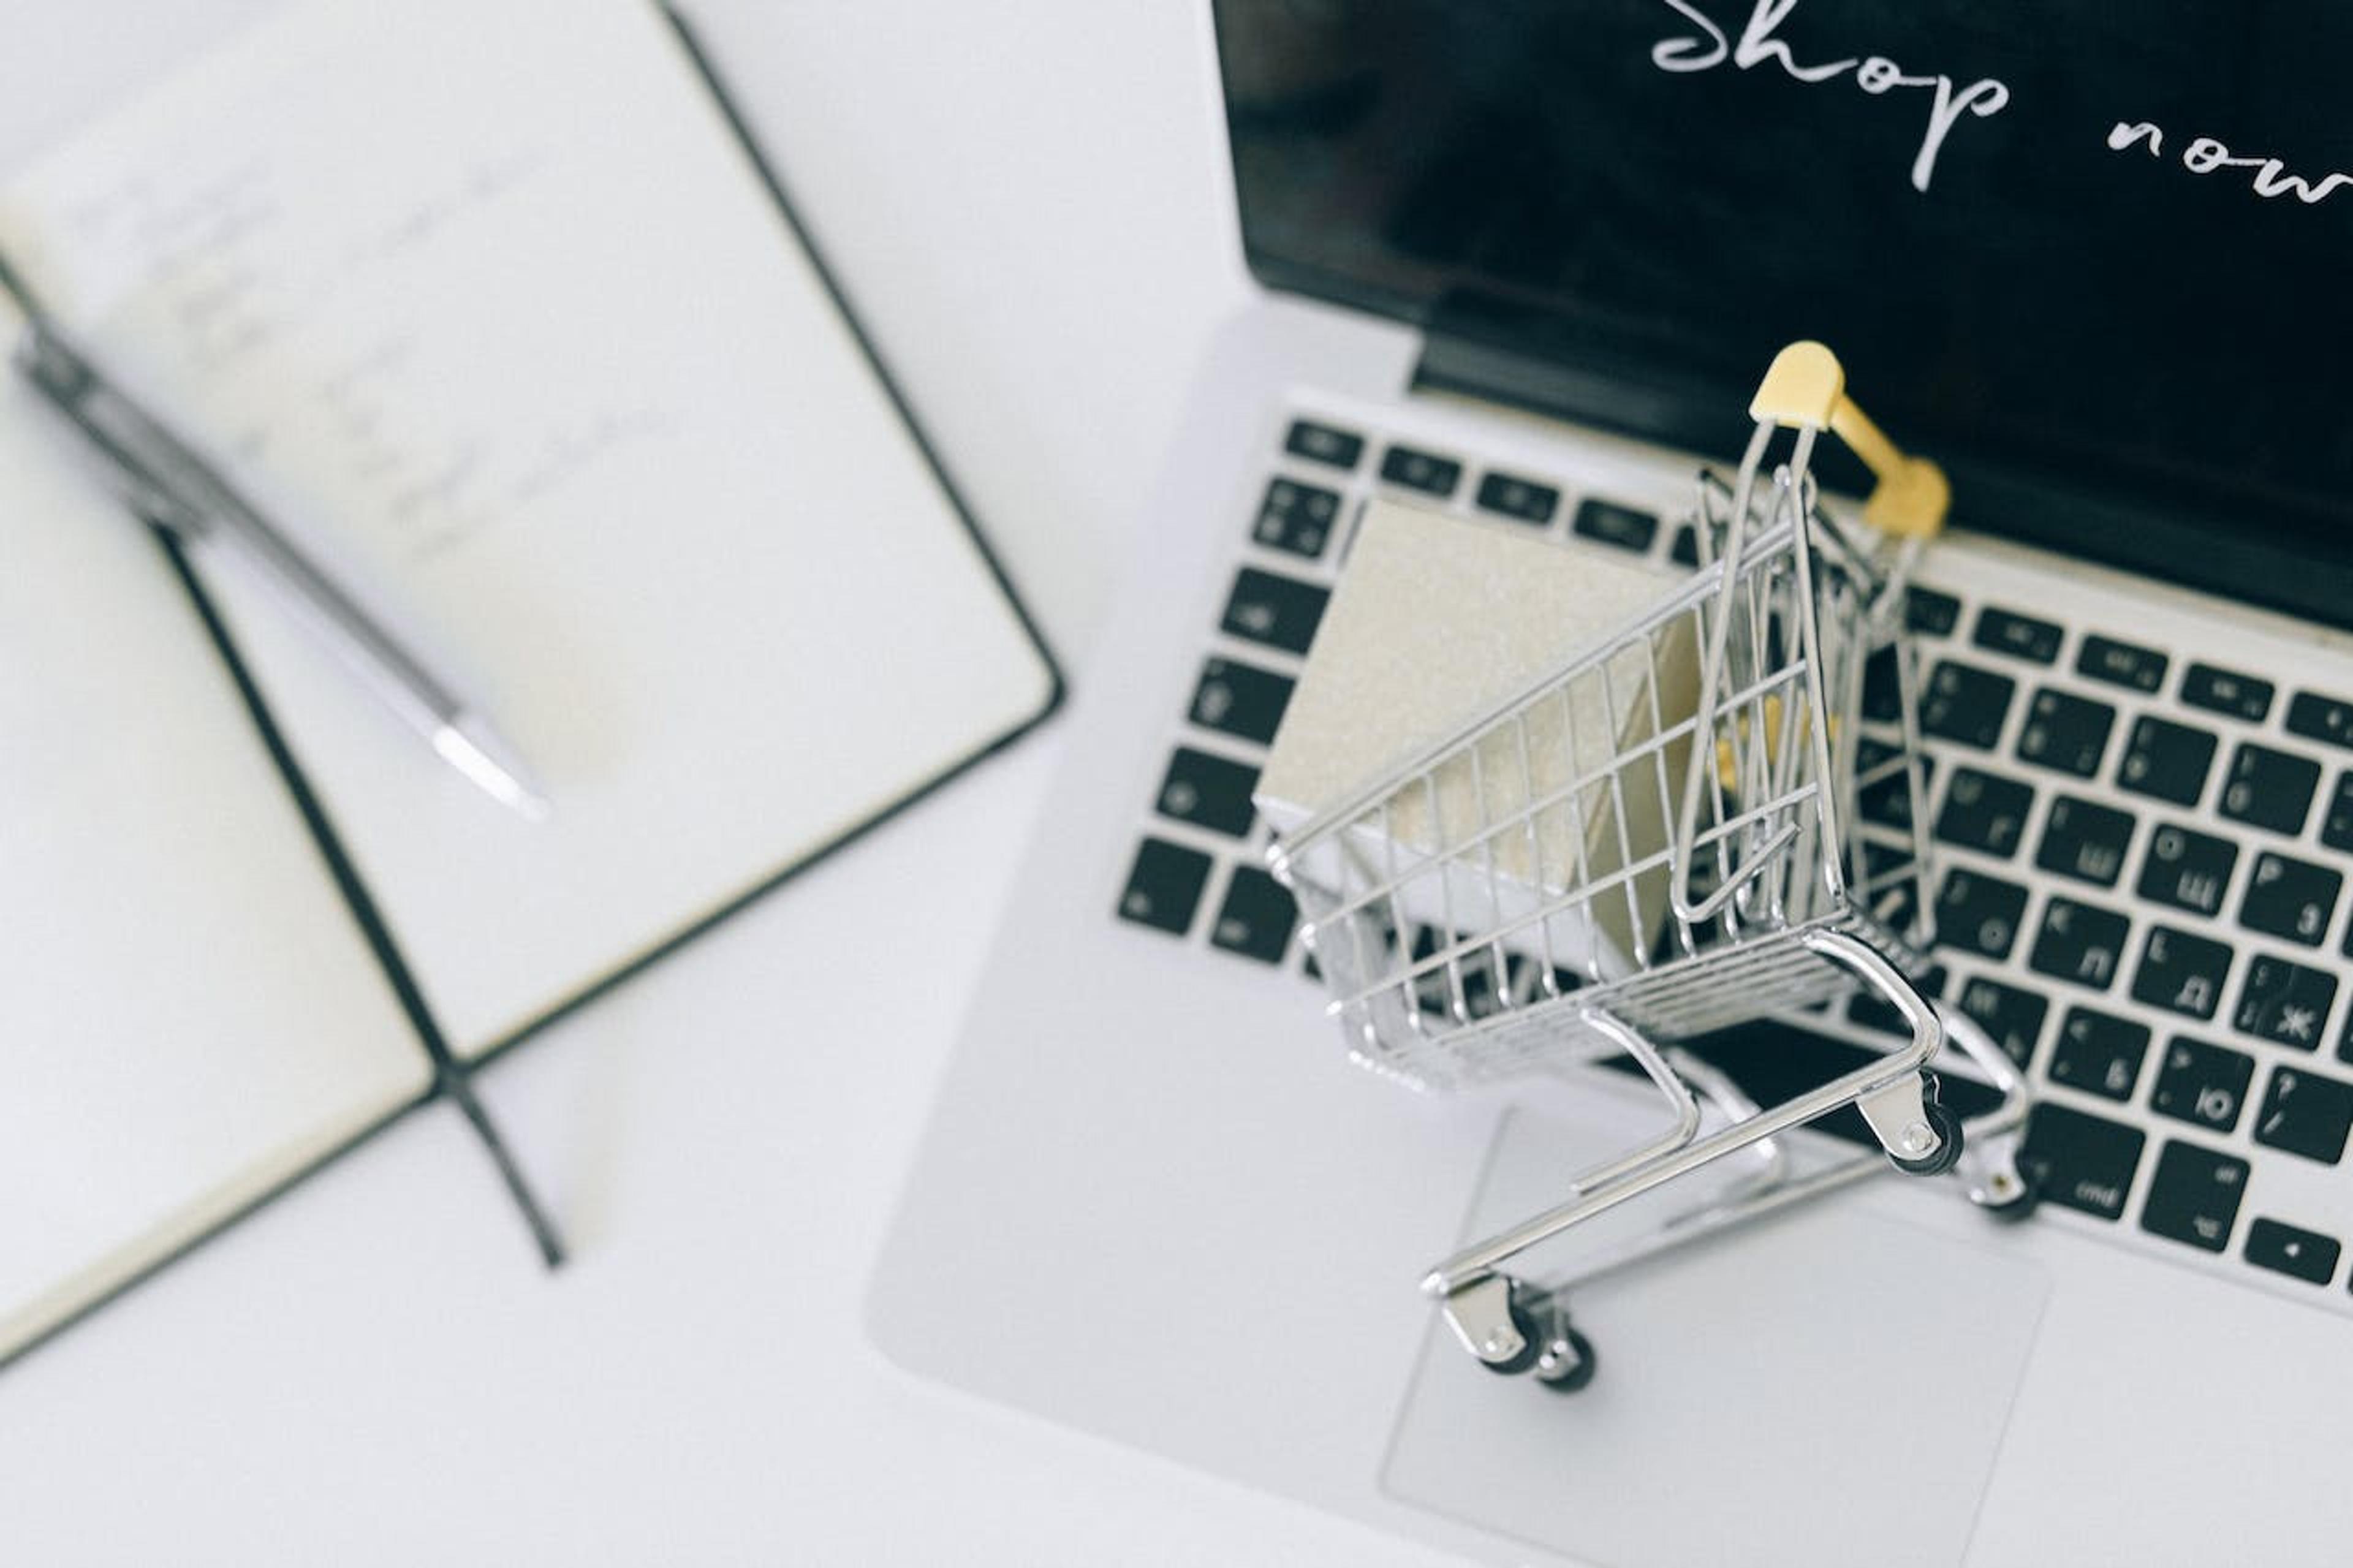 A shopping cart laying on a laptop illustrating online shopping.